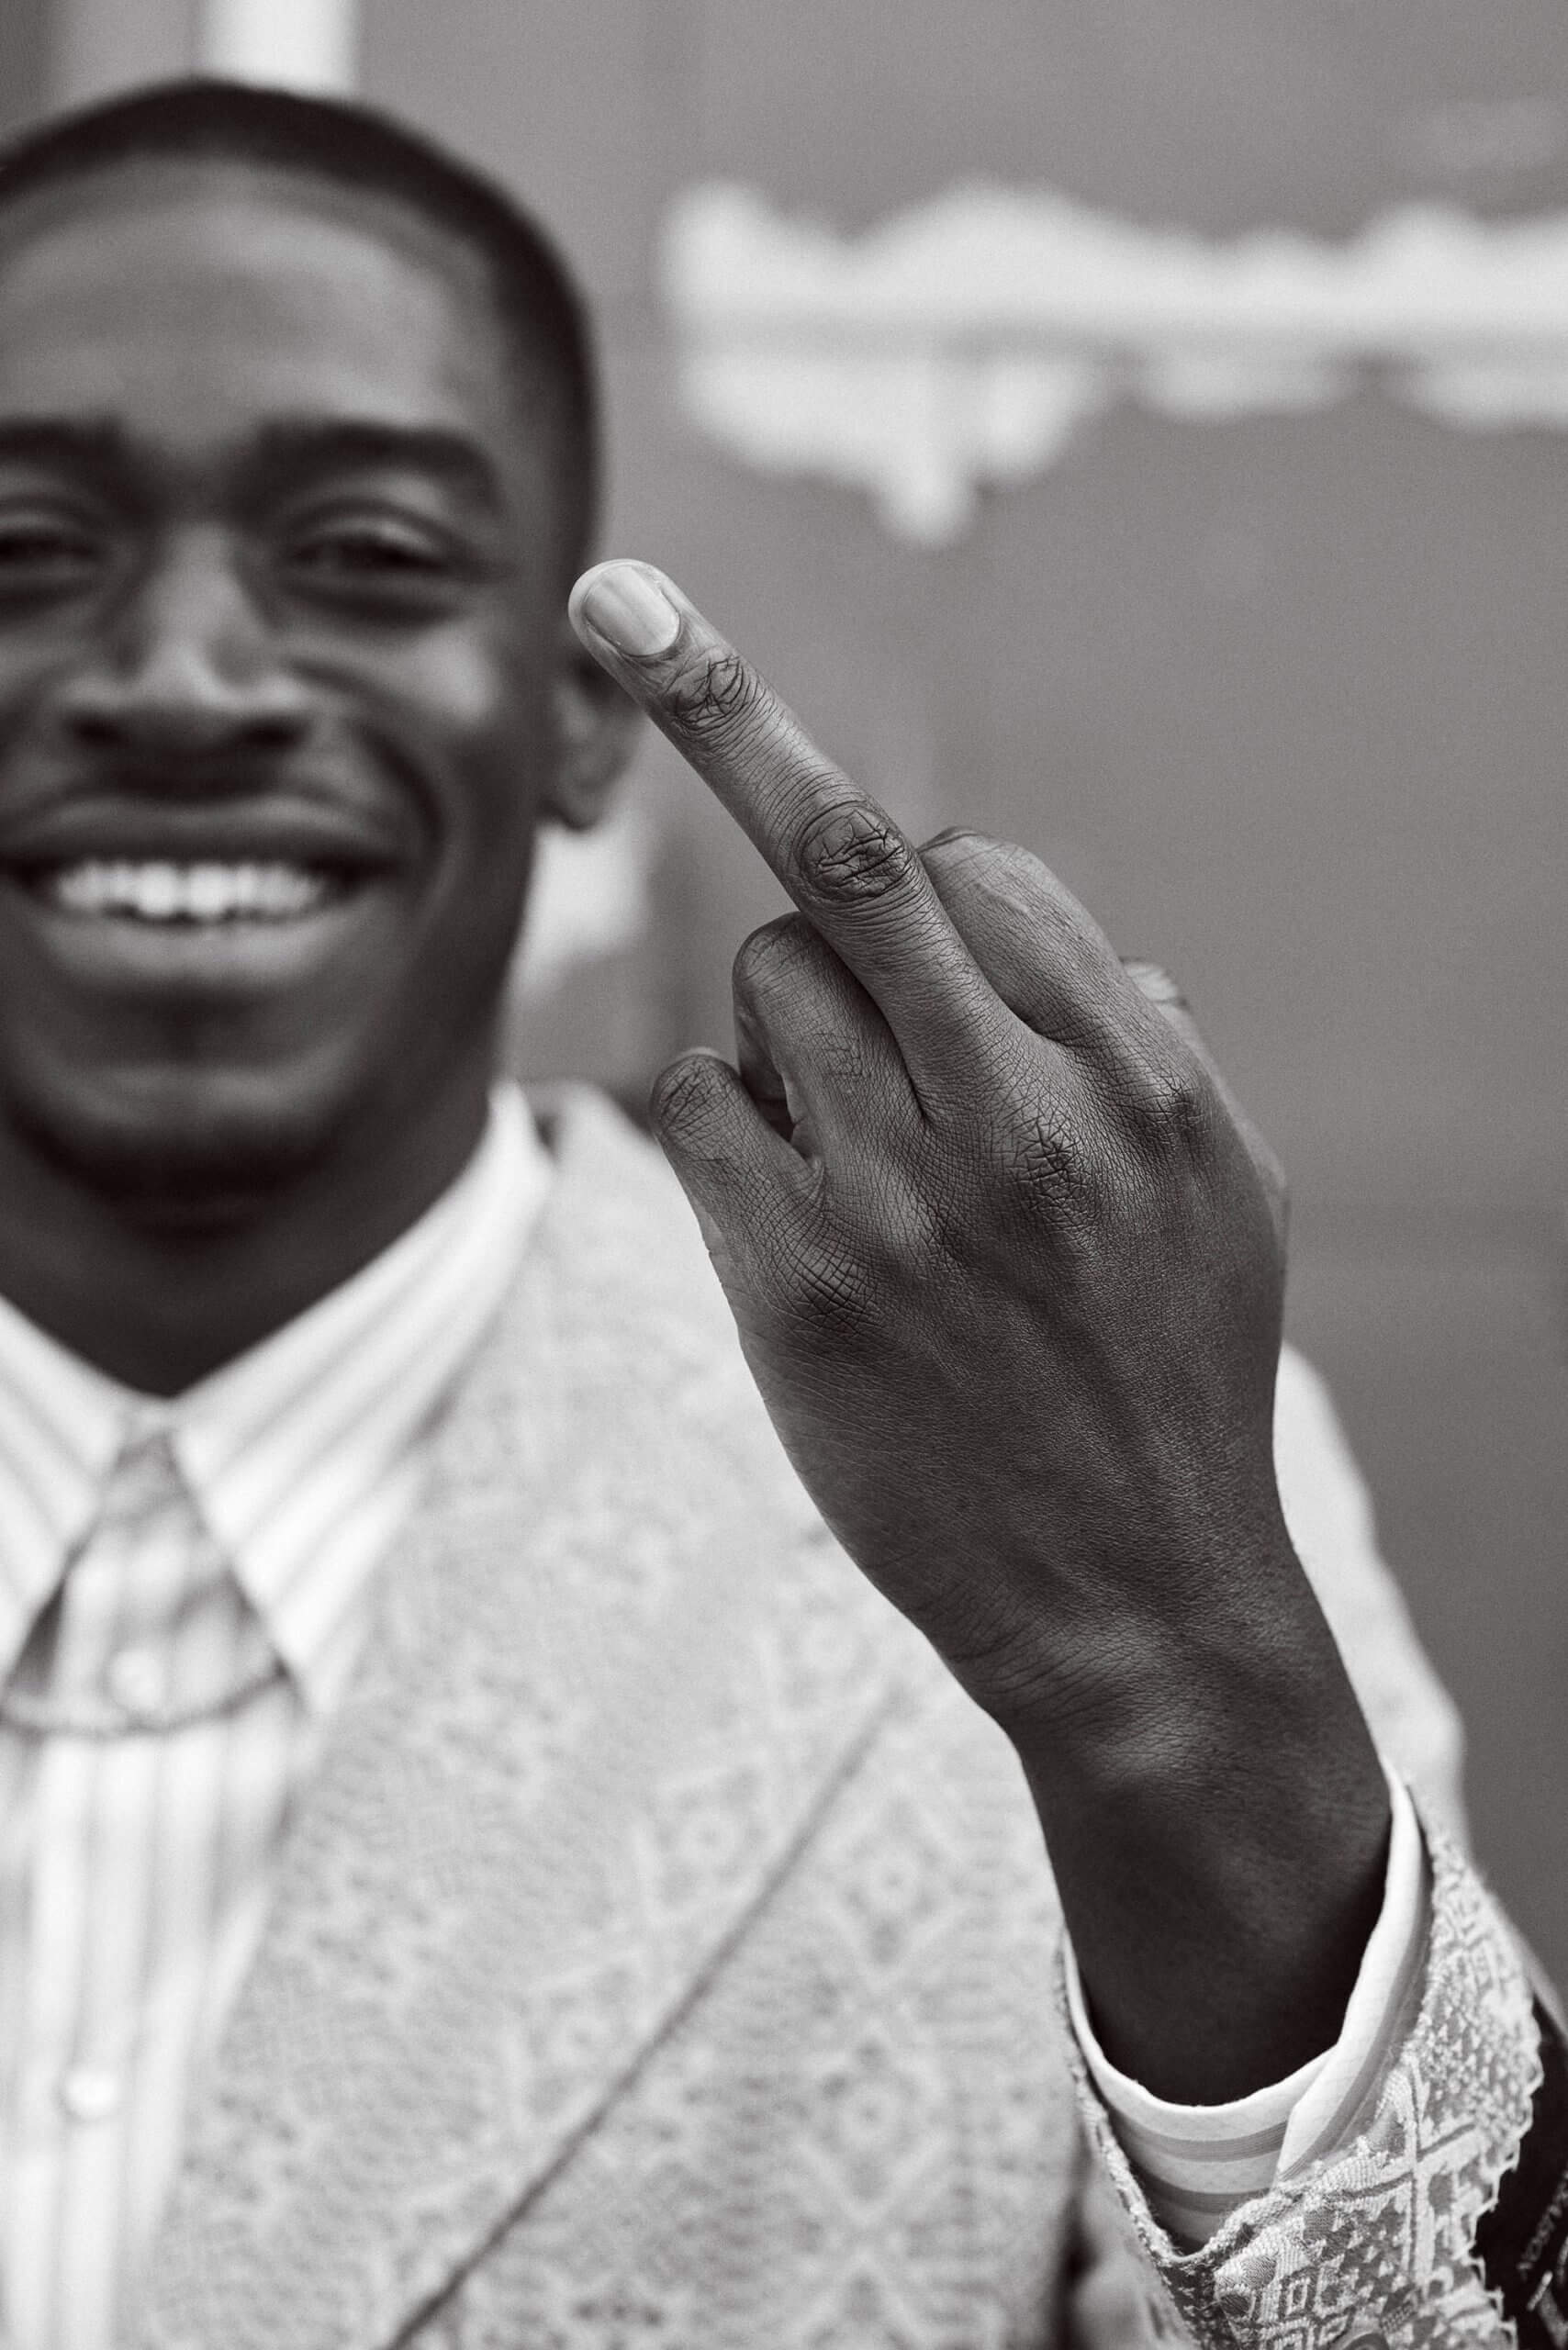 Damson Idris sticking his middle finger up at the camera